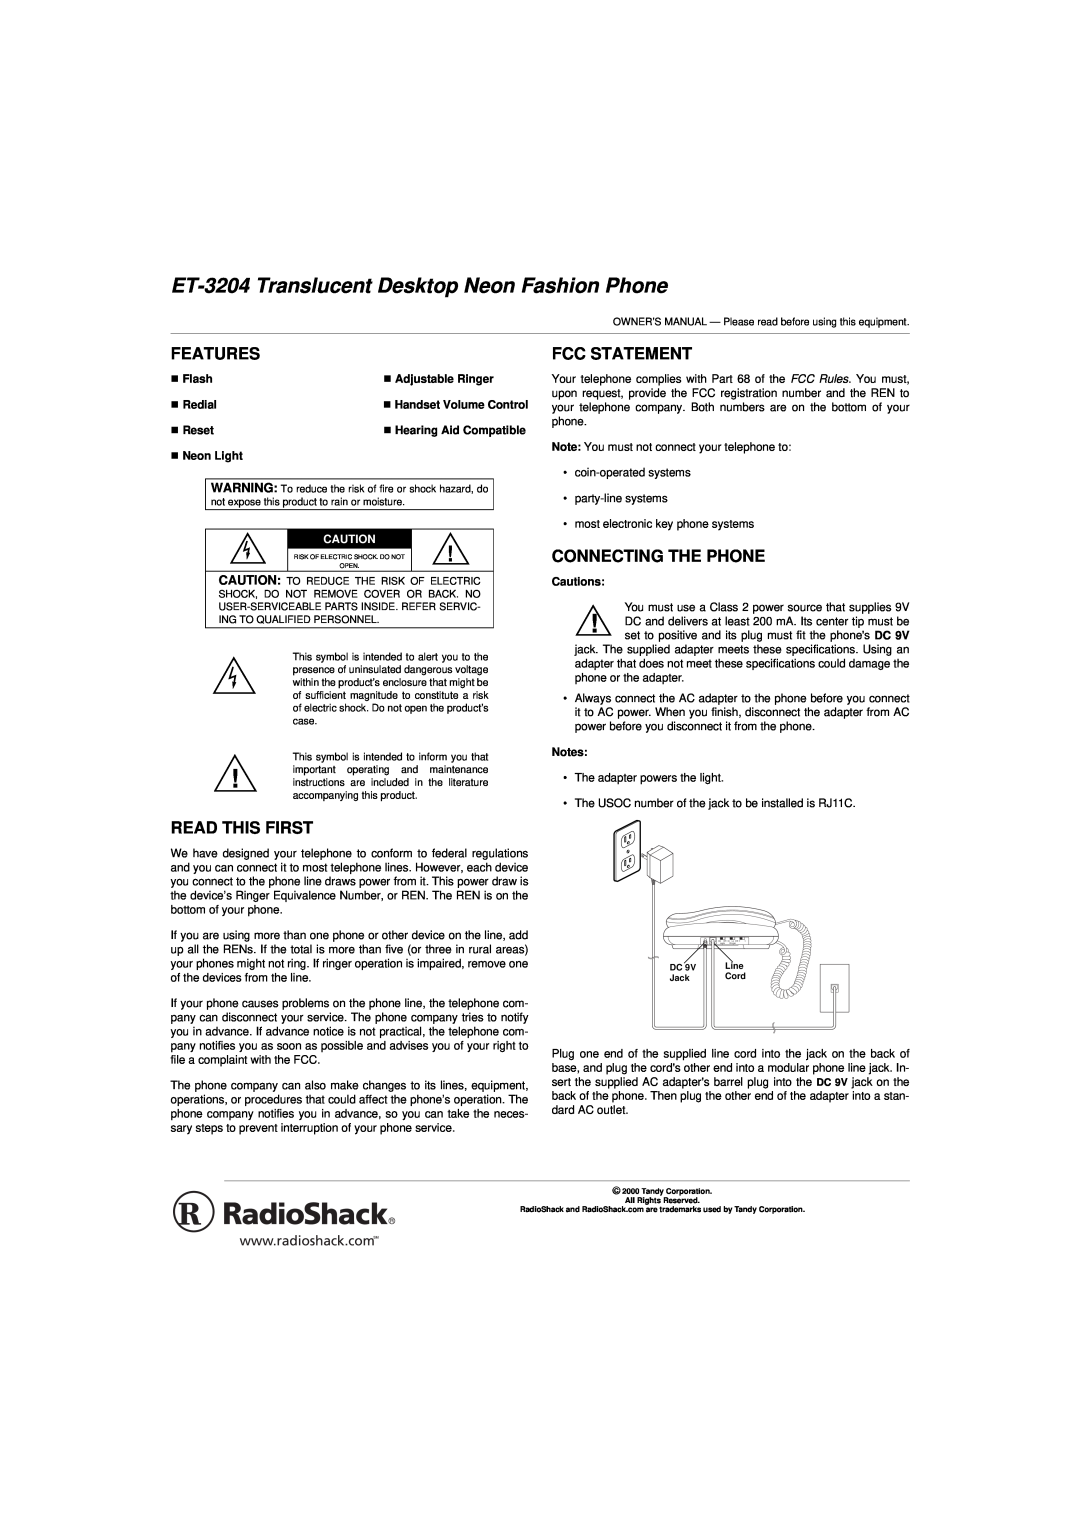 Radio Shack ET-3204 owner manual Features, Read This First, Fcc Statement, Connecting The Phone, „ Flash, „ Redial 